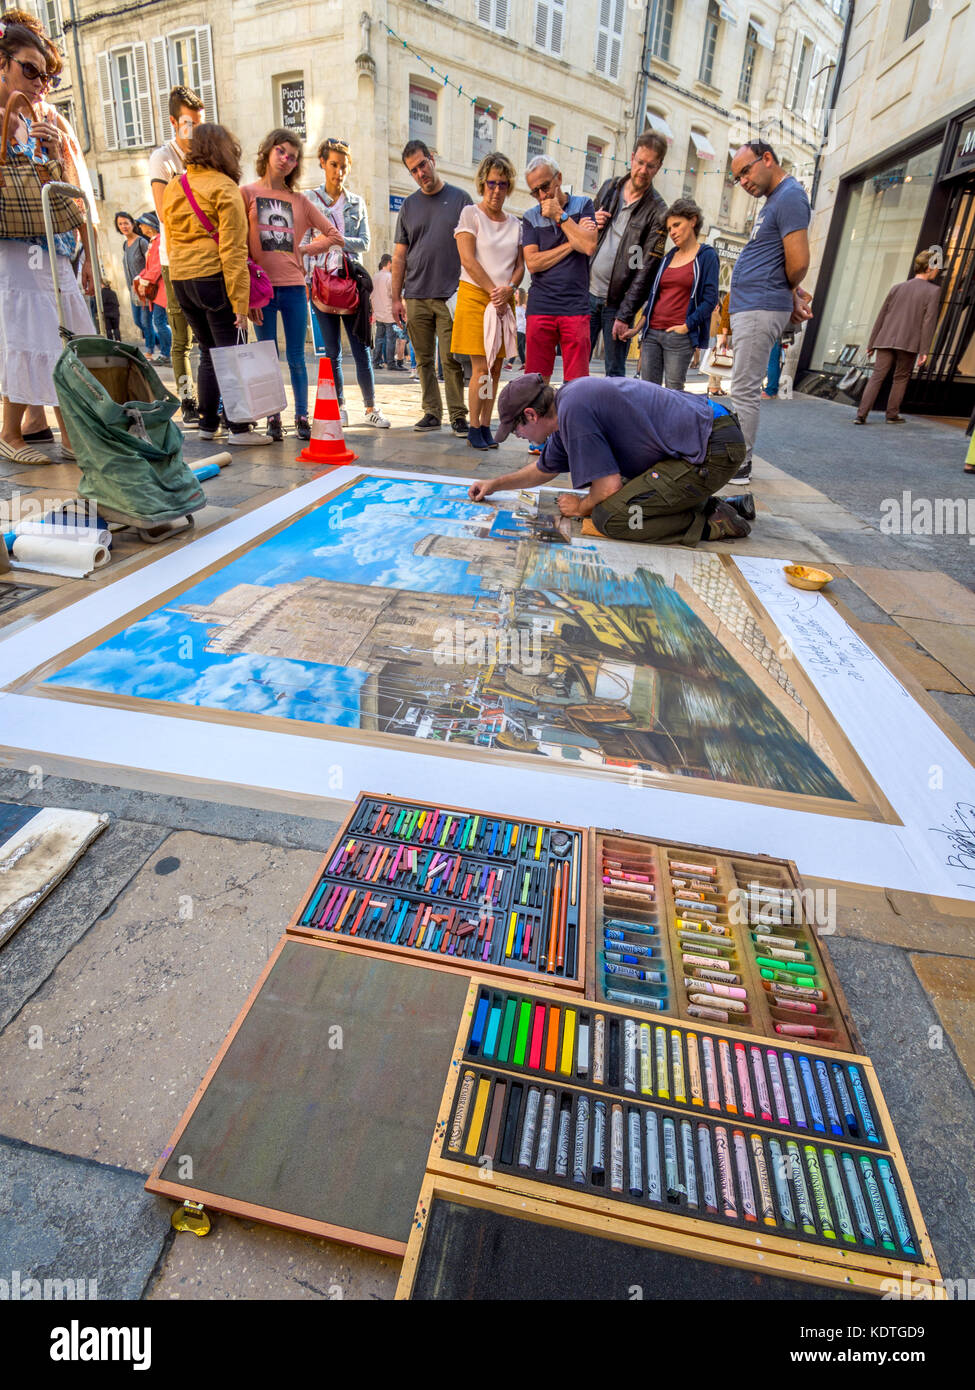 Pavement artist Didier Herry drawing with pastels, La Rochelle, France. Stock Photo